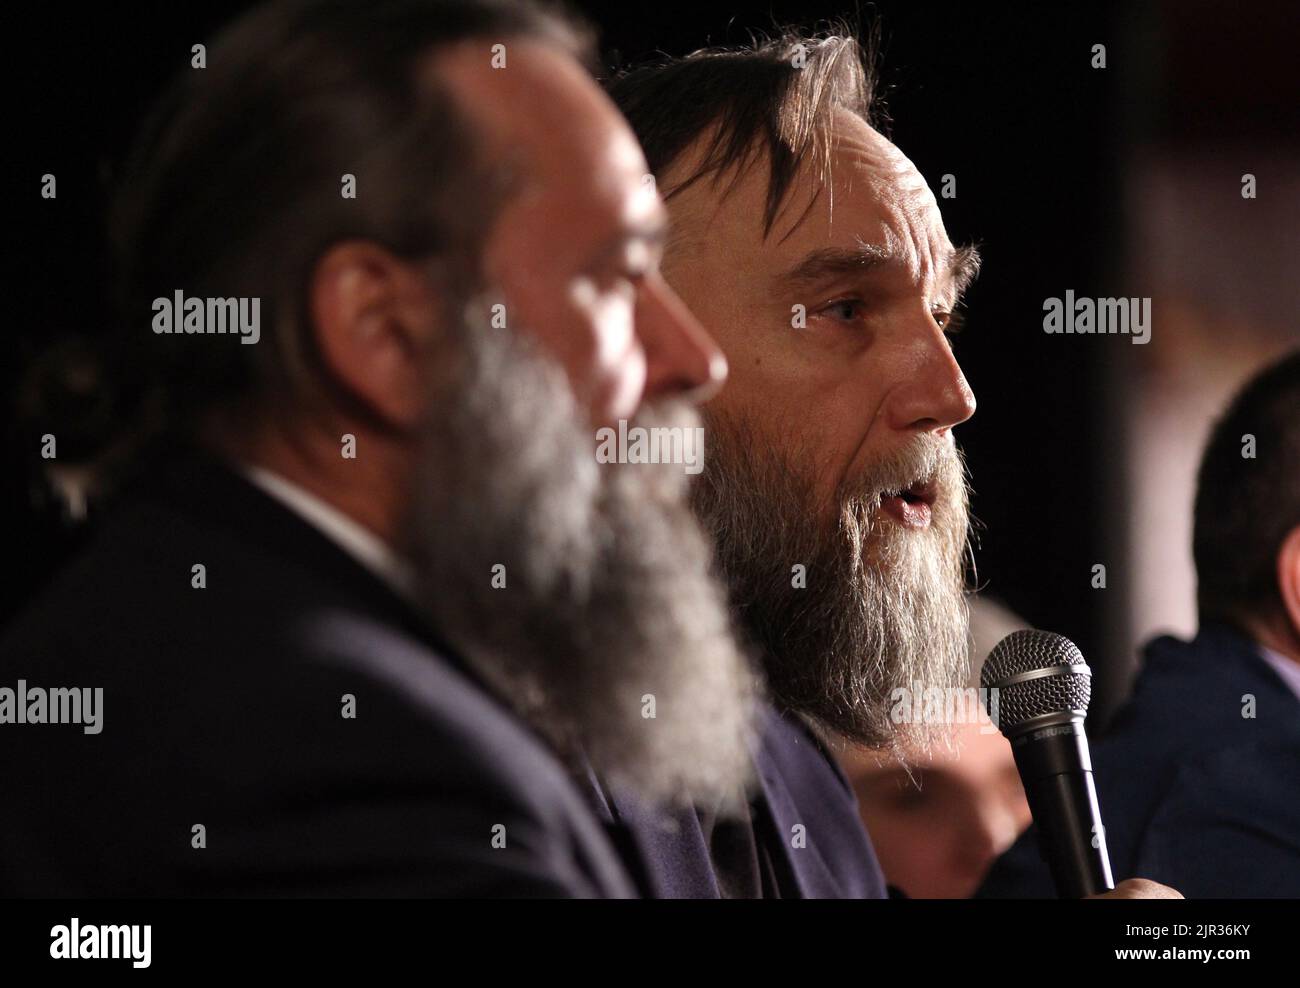 Bucharest, Romania - April 05, 2017: Aleksandr Dugin, Russian political analyst, strategist, writer and philosopher, holds a press conference in Bucha Stock Photo